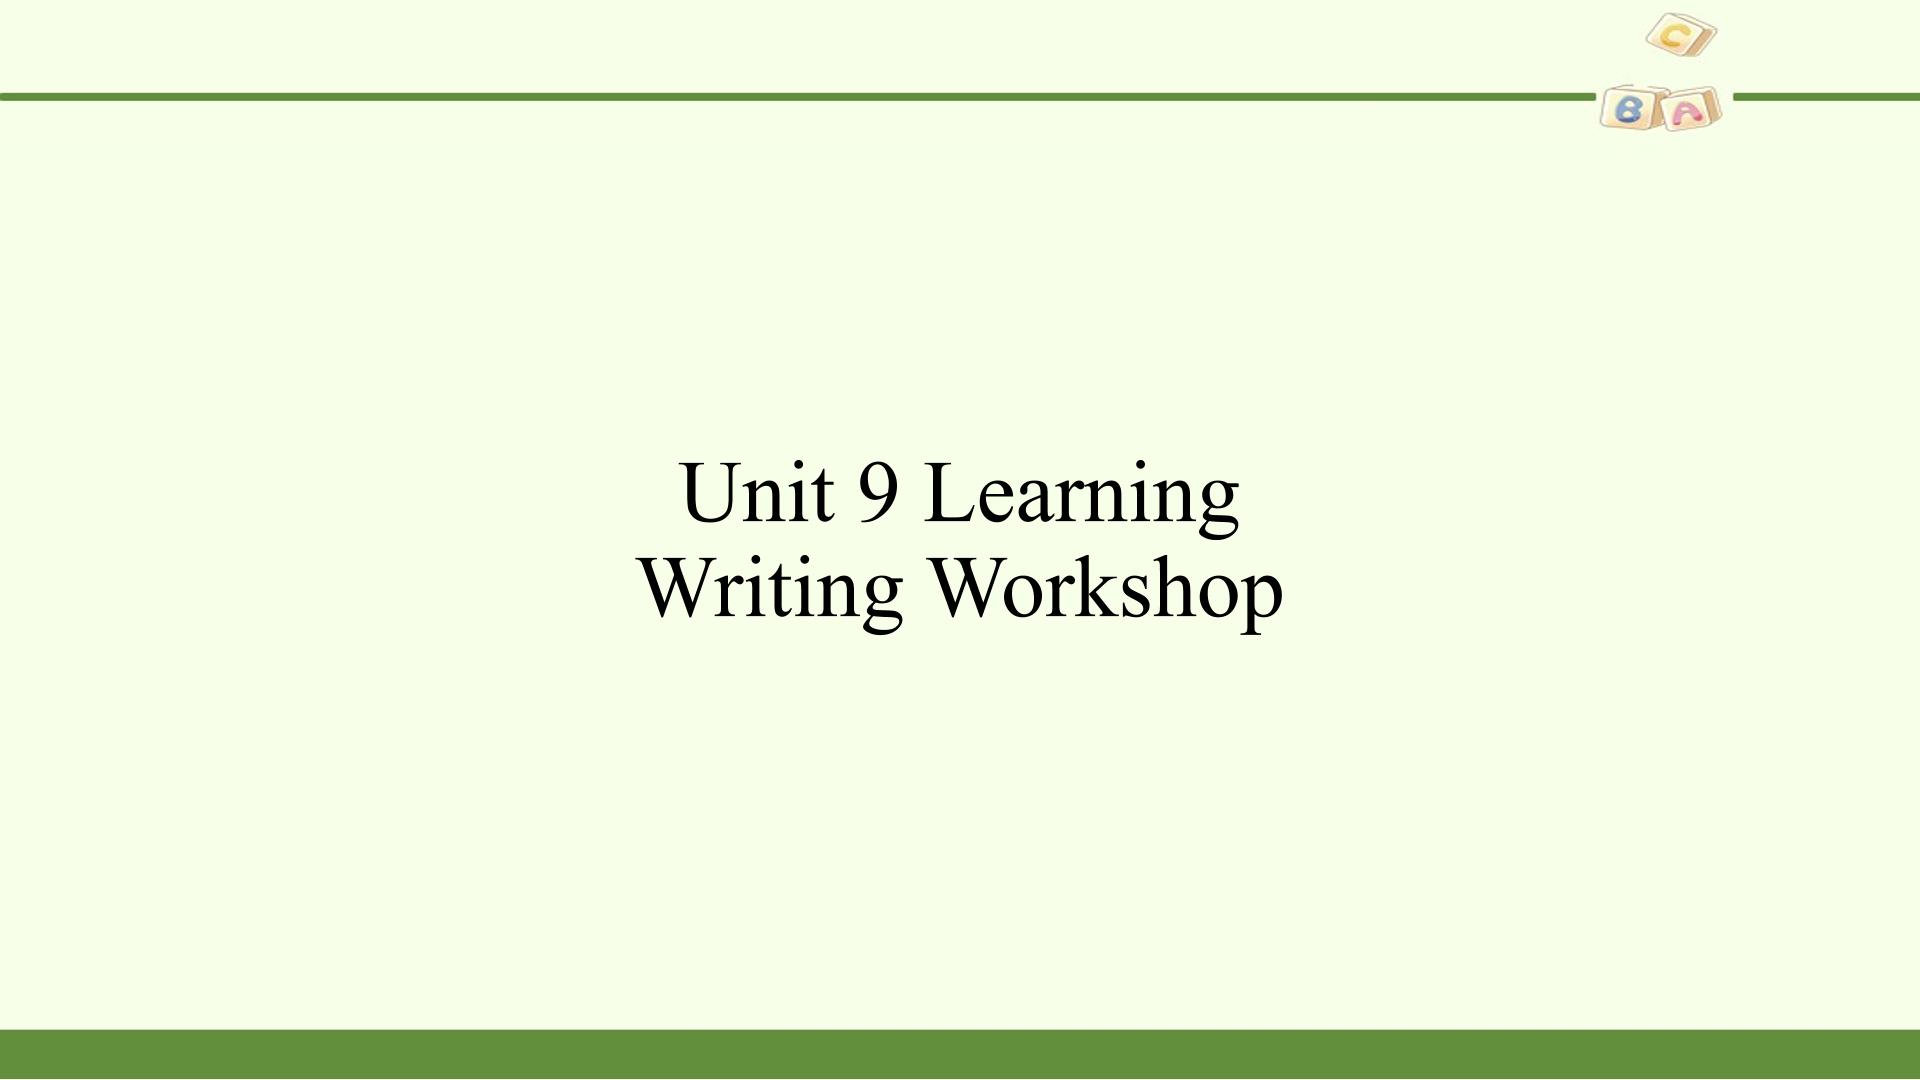 Writing Workshop— A Learning Reflection